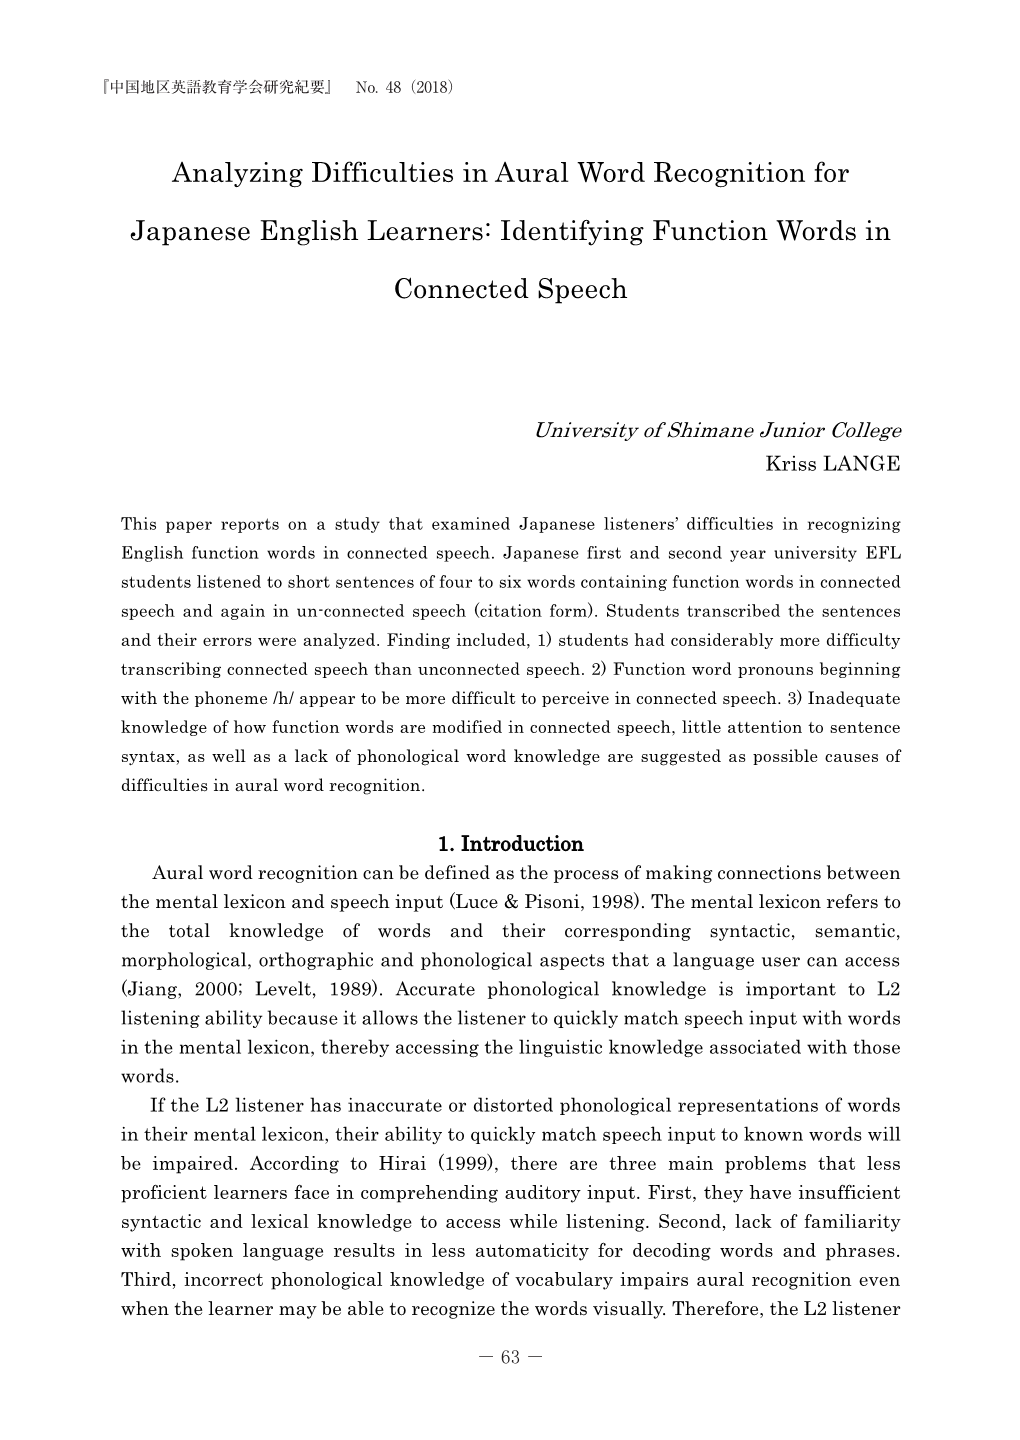 Analyzing Difficulties in Aural Word Recognition for Japanese English